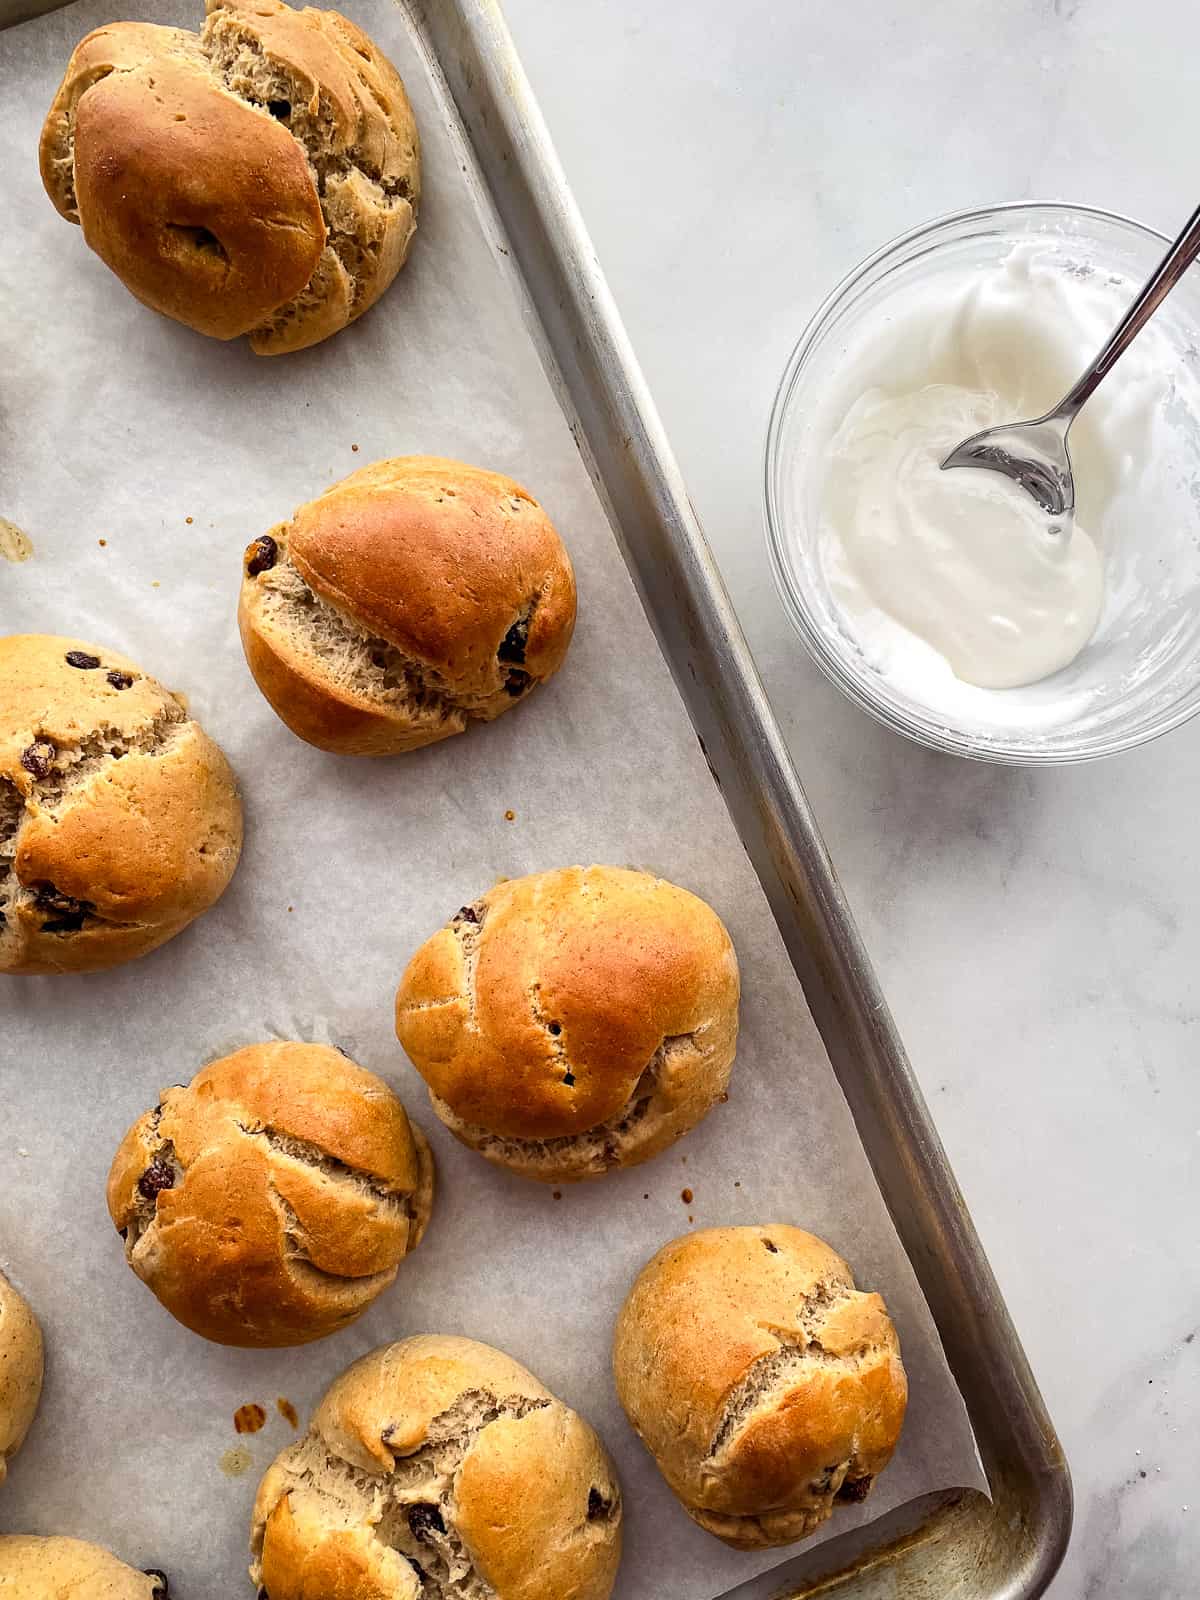 Gluten-free hot cross buns on a baking sheet. A small bowl of icing sits off to the side.